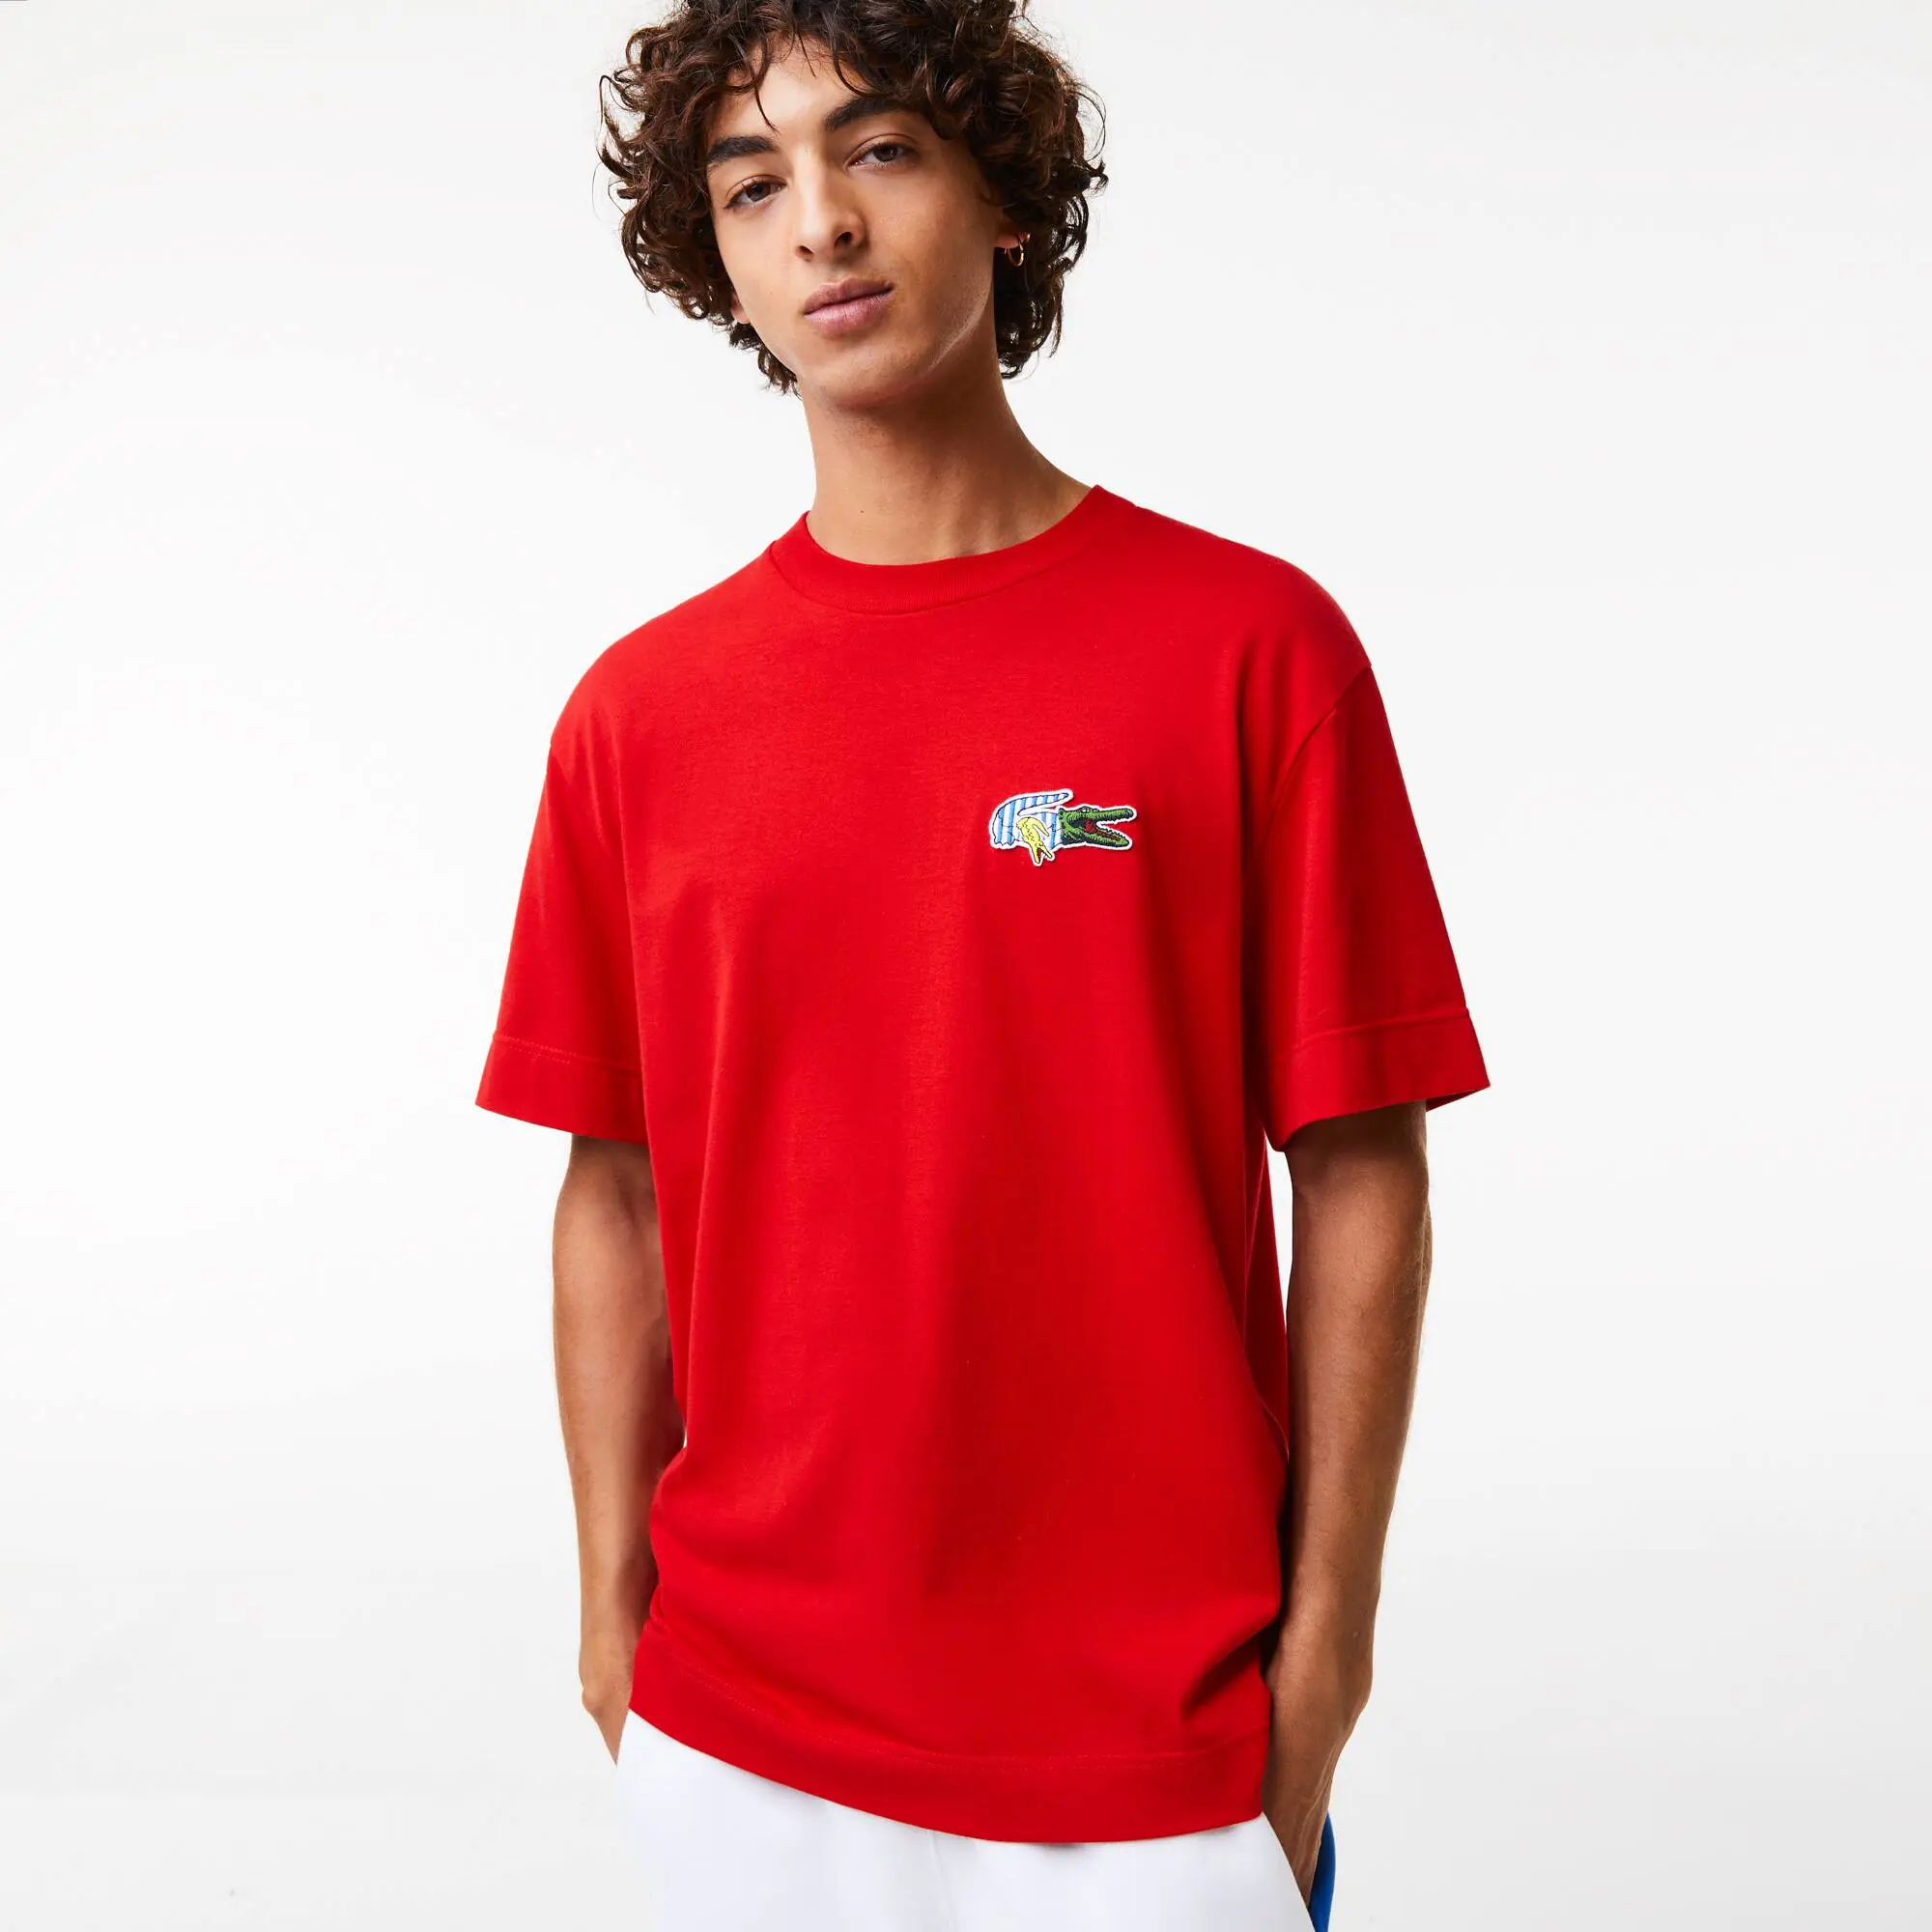 Lacoste Men's Lacoste Holiday Relaxed Fit Comic Effect Badge T-Shirt. 1